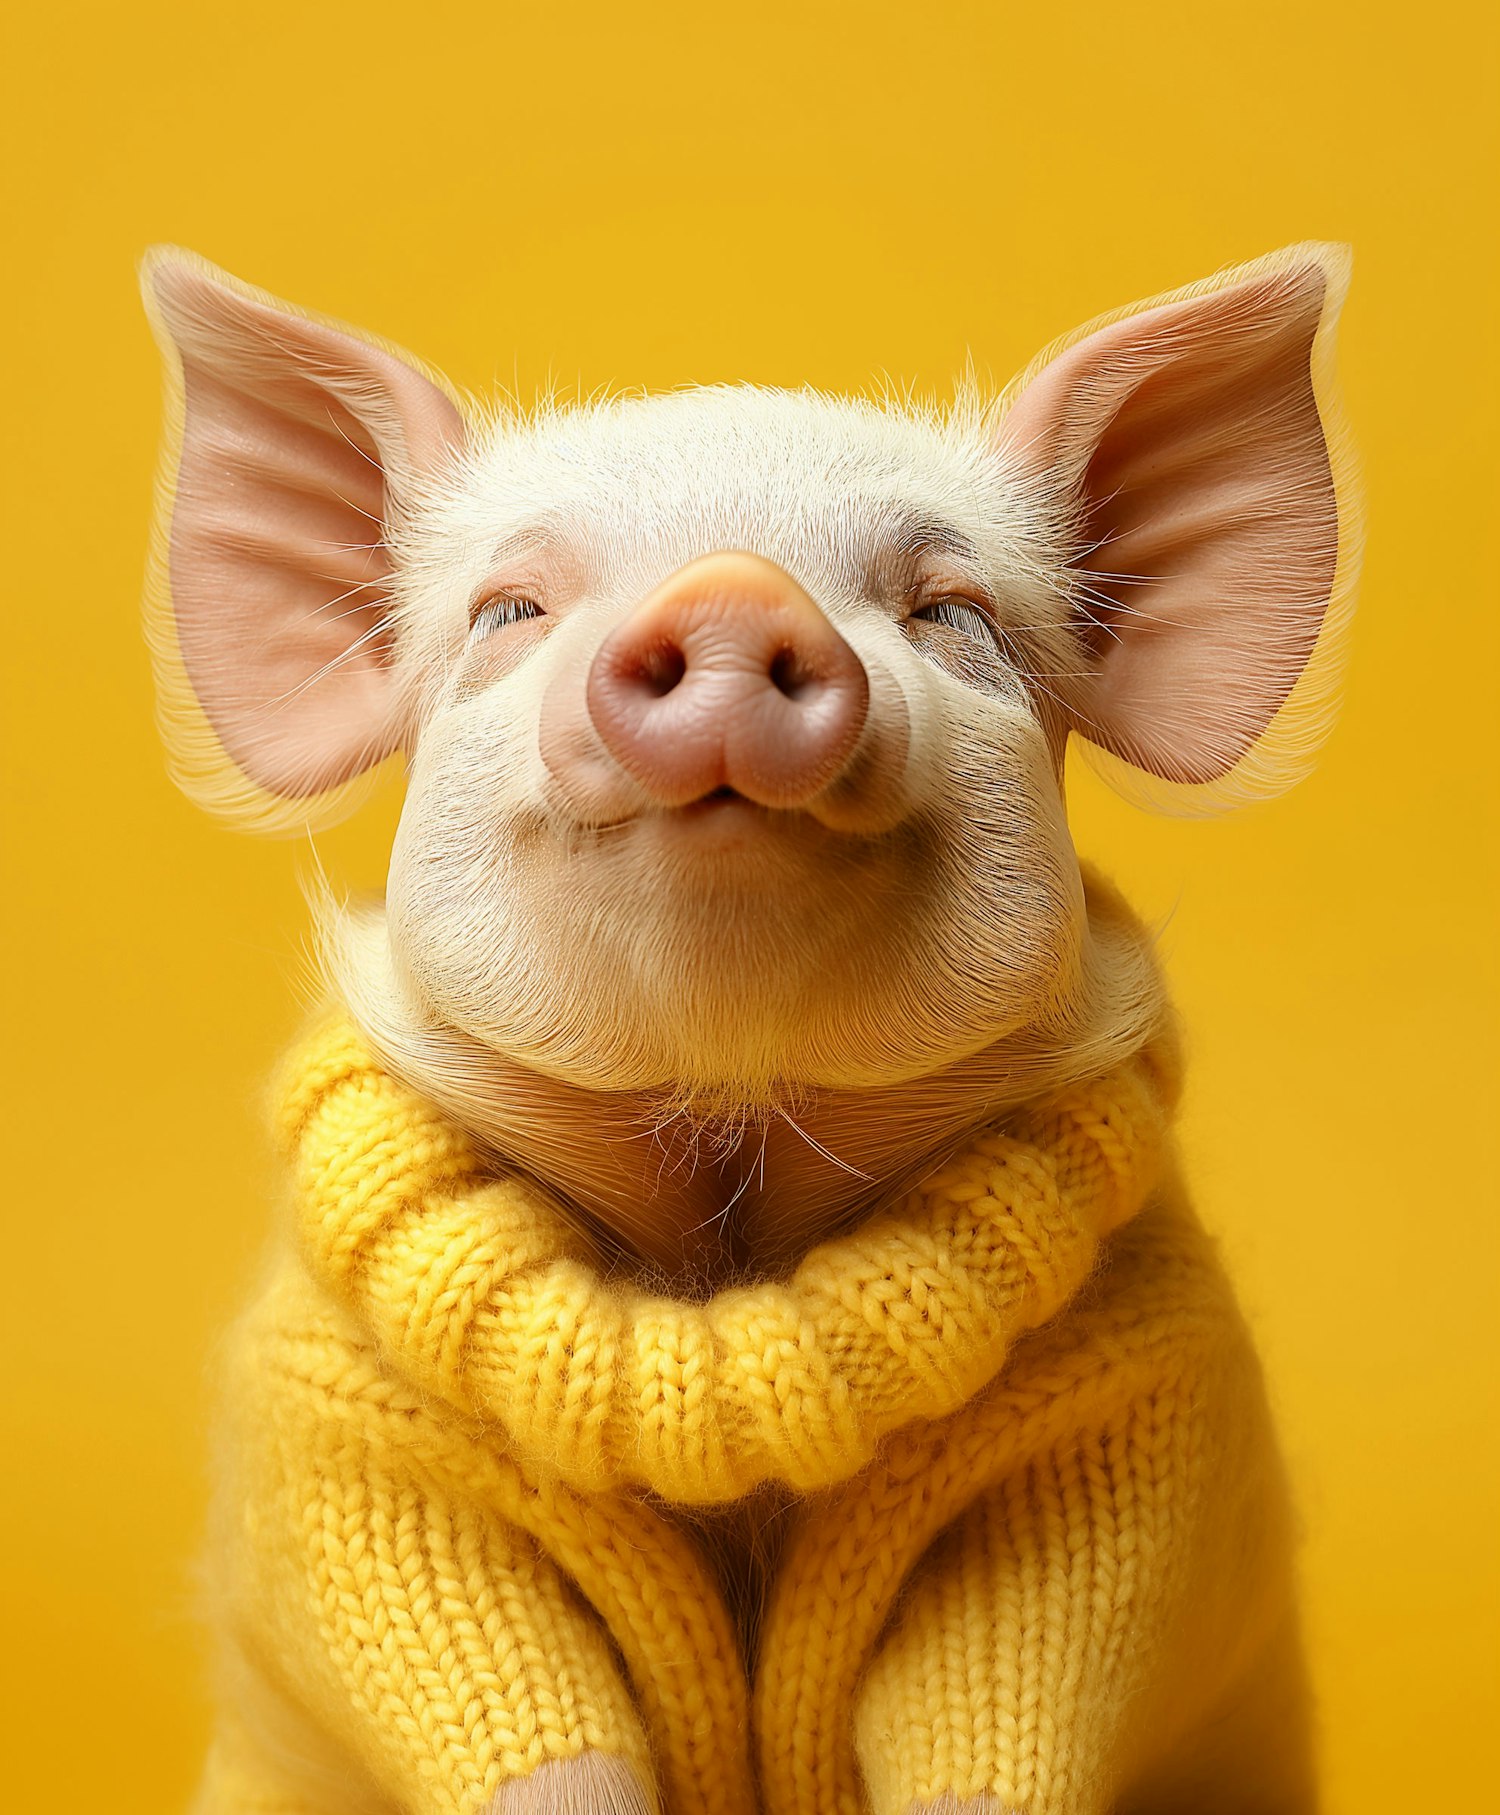 Portrait of a Pig in Yellow